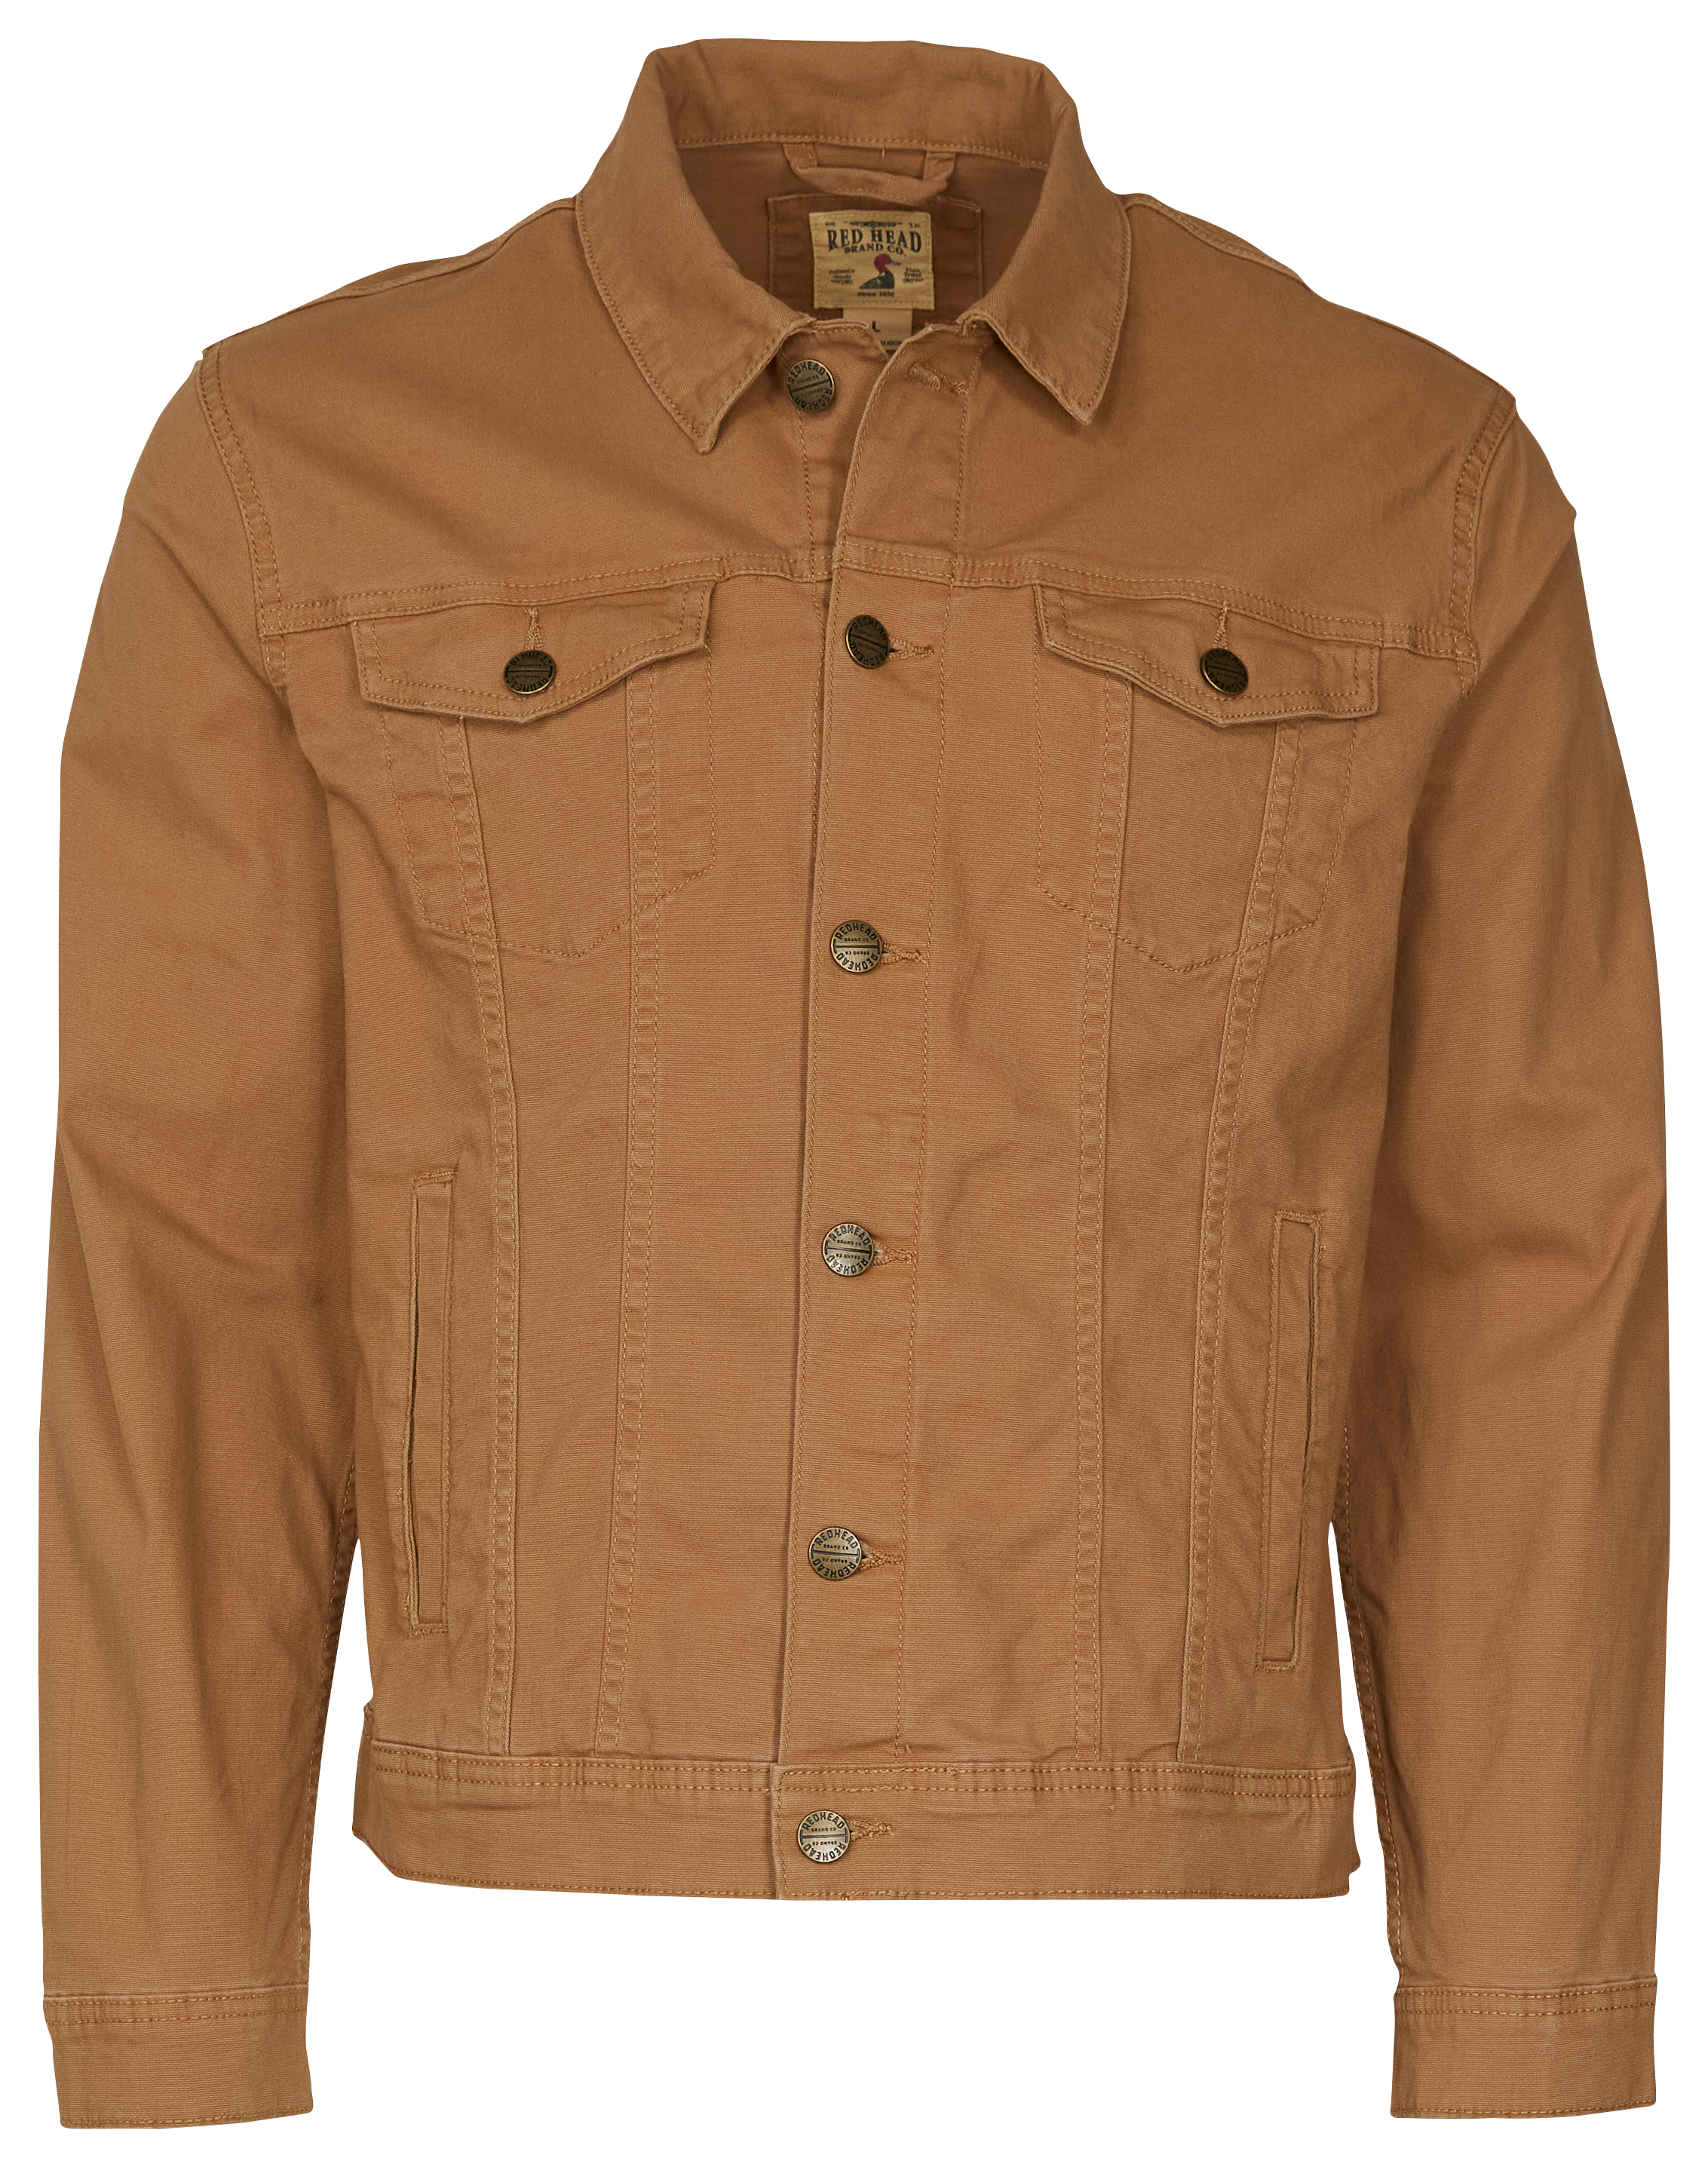 RedHead Double-Pocket Canvas Jacket for Men